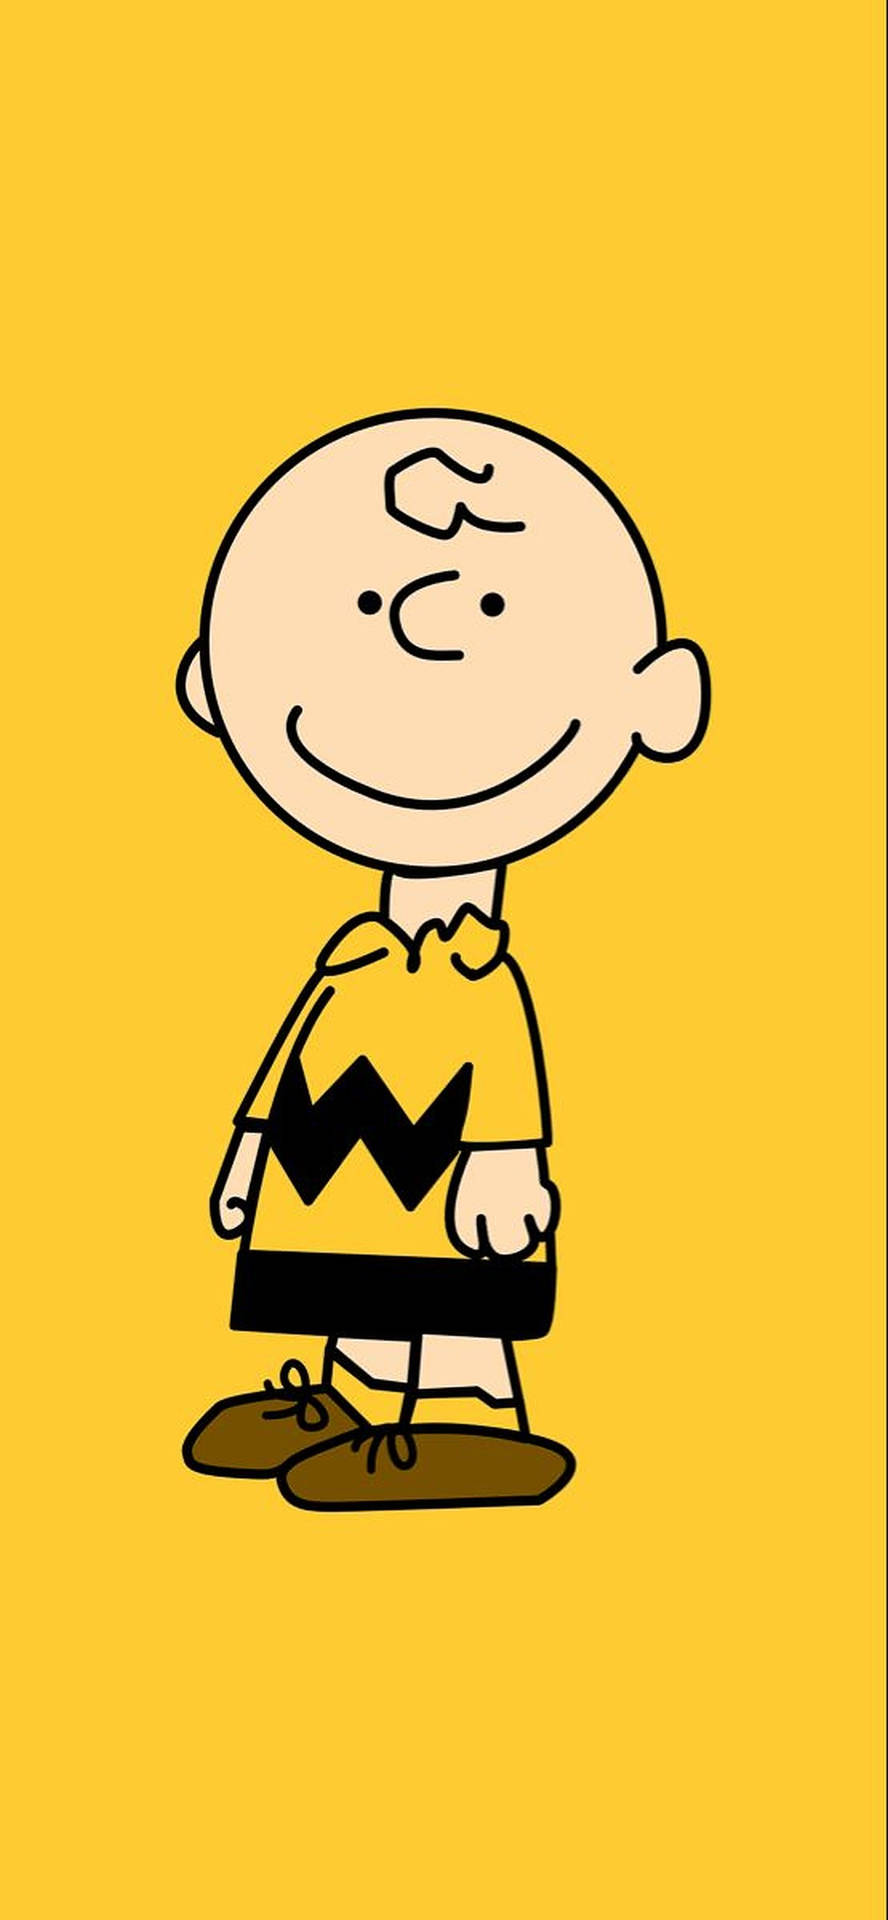 Free Charlie Brown Wallpaper Downloads, [200+] Charlie Brown Wallpapers for  FREE 